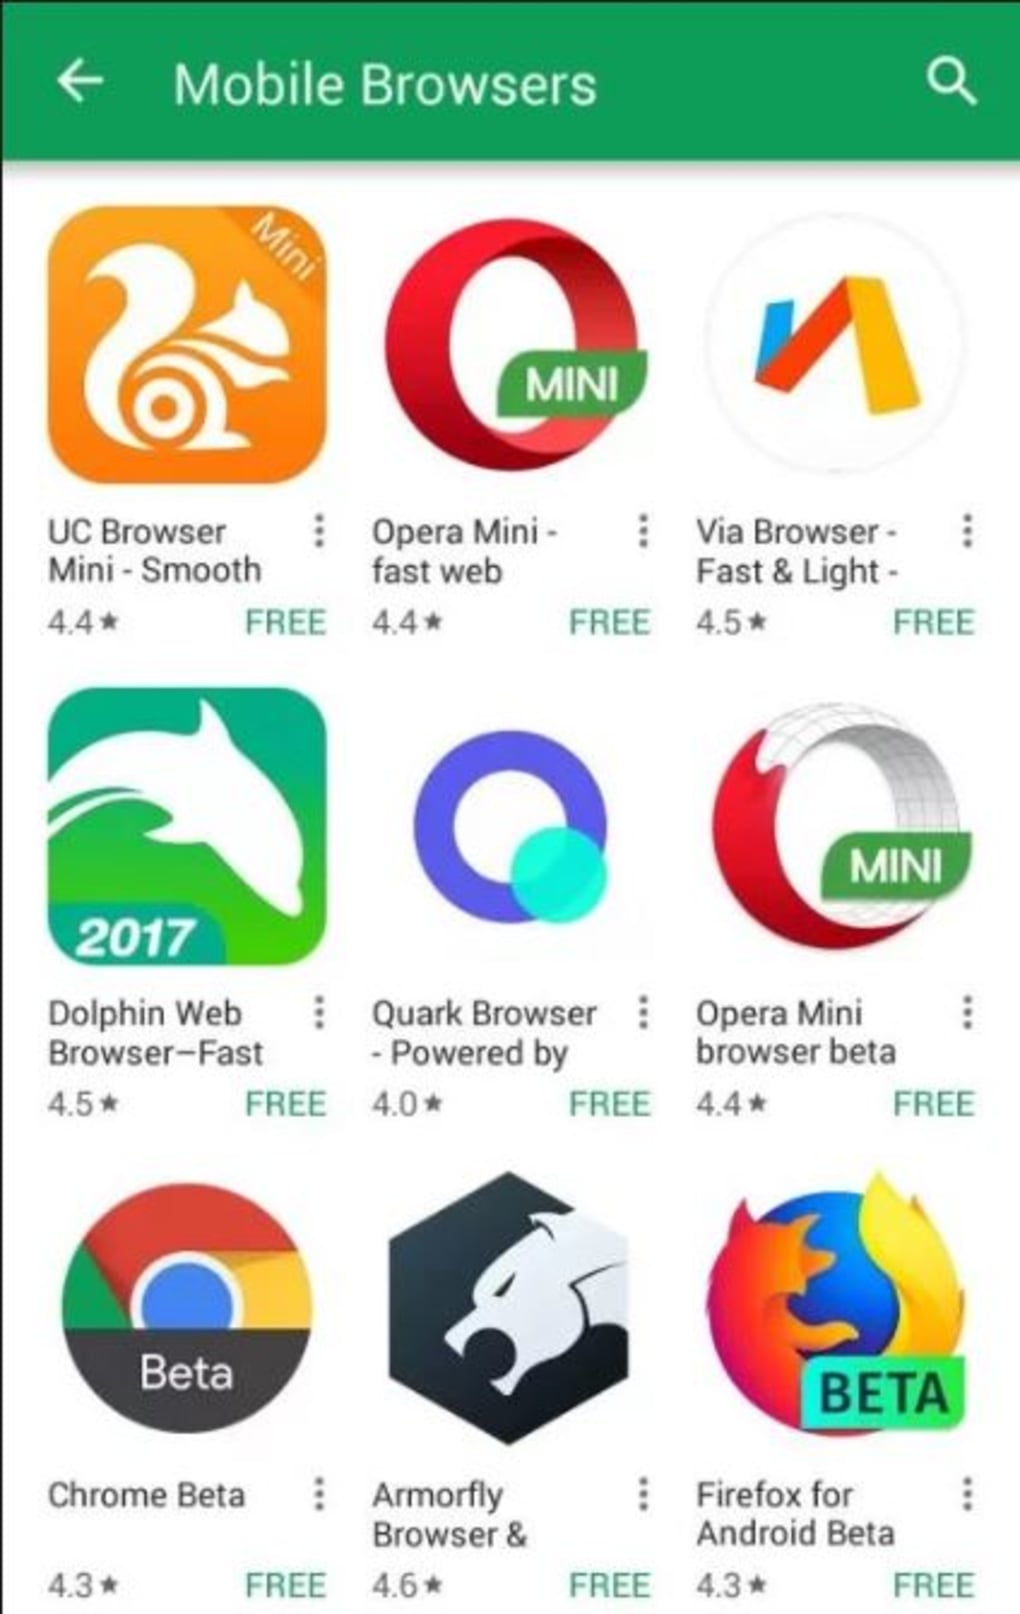 Android Store App Free Download